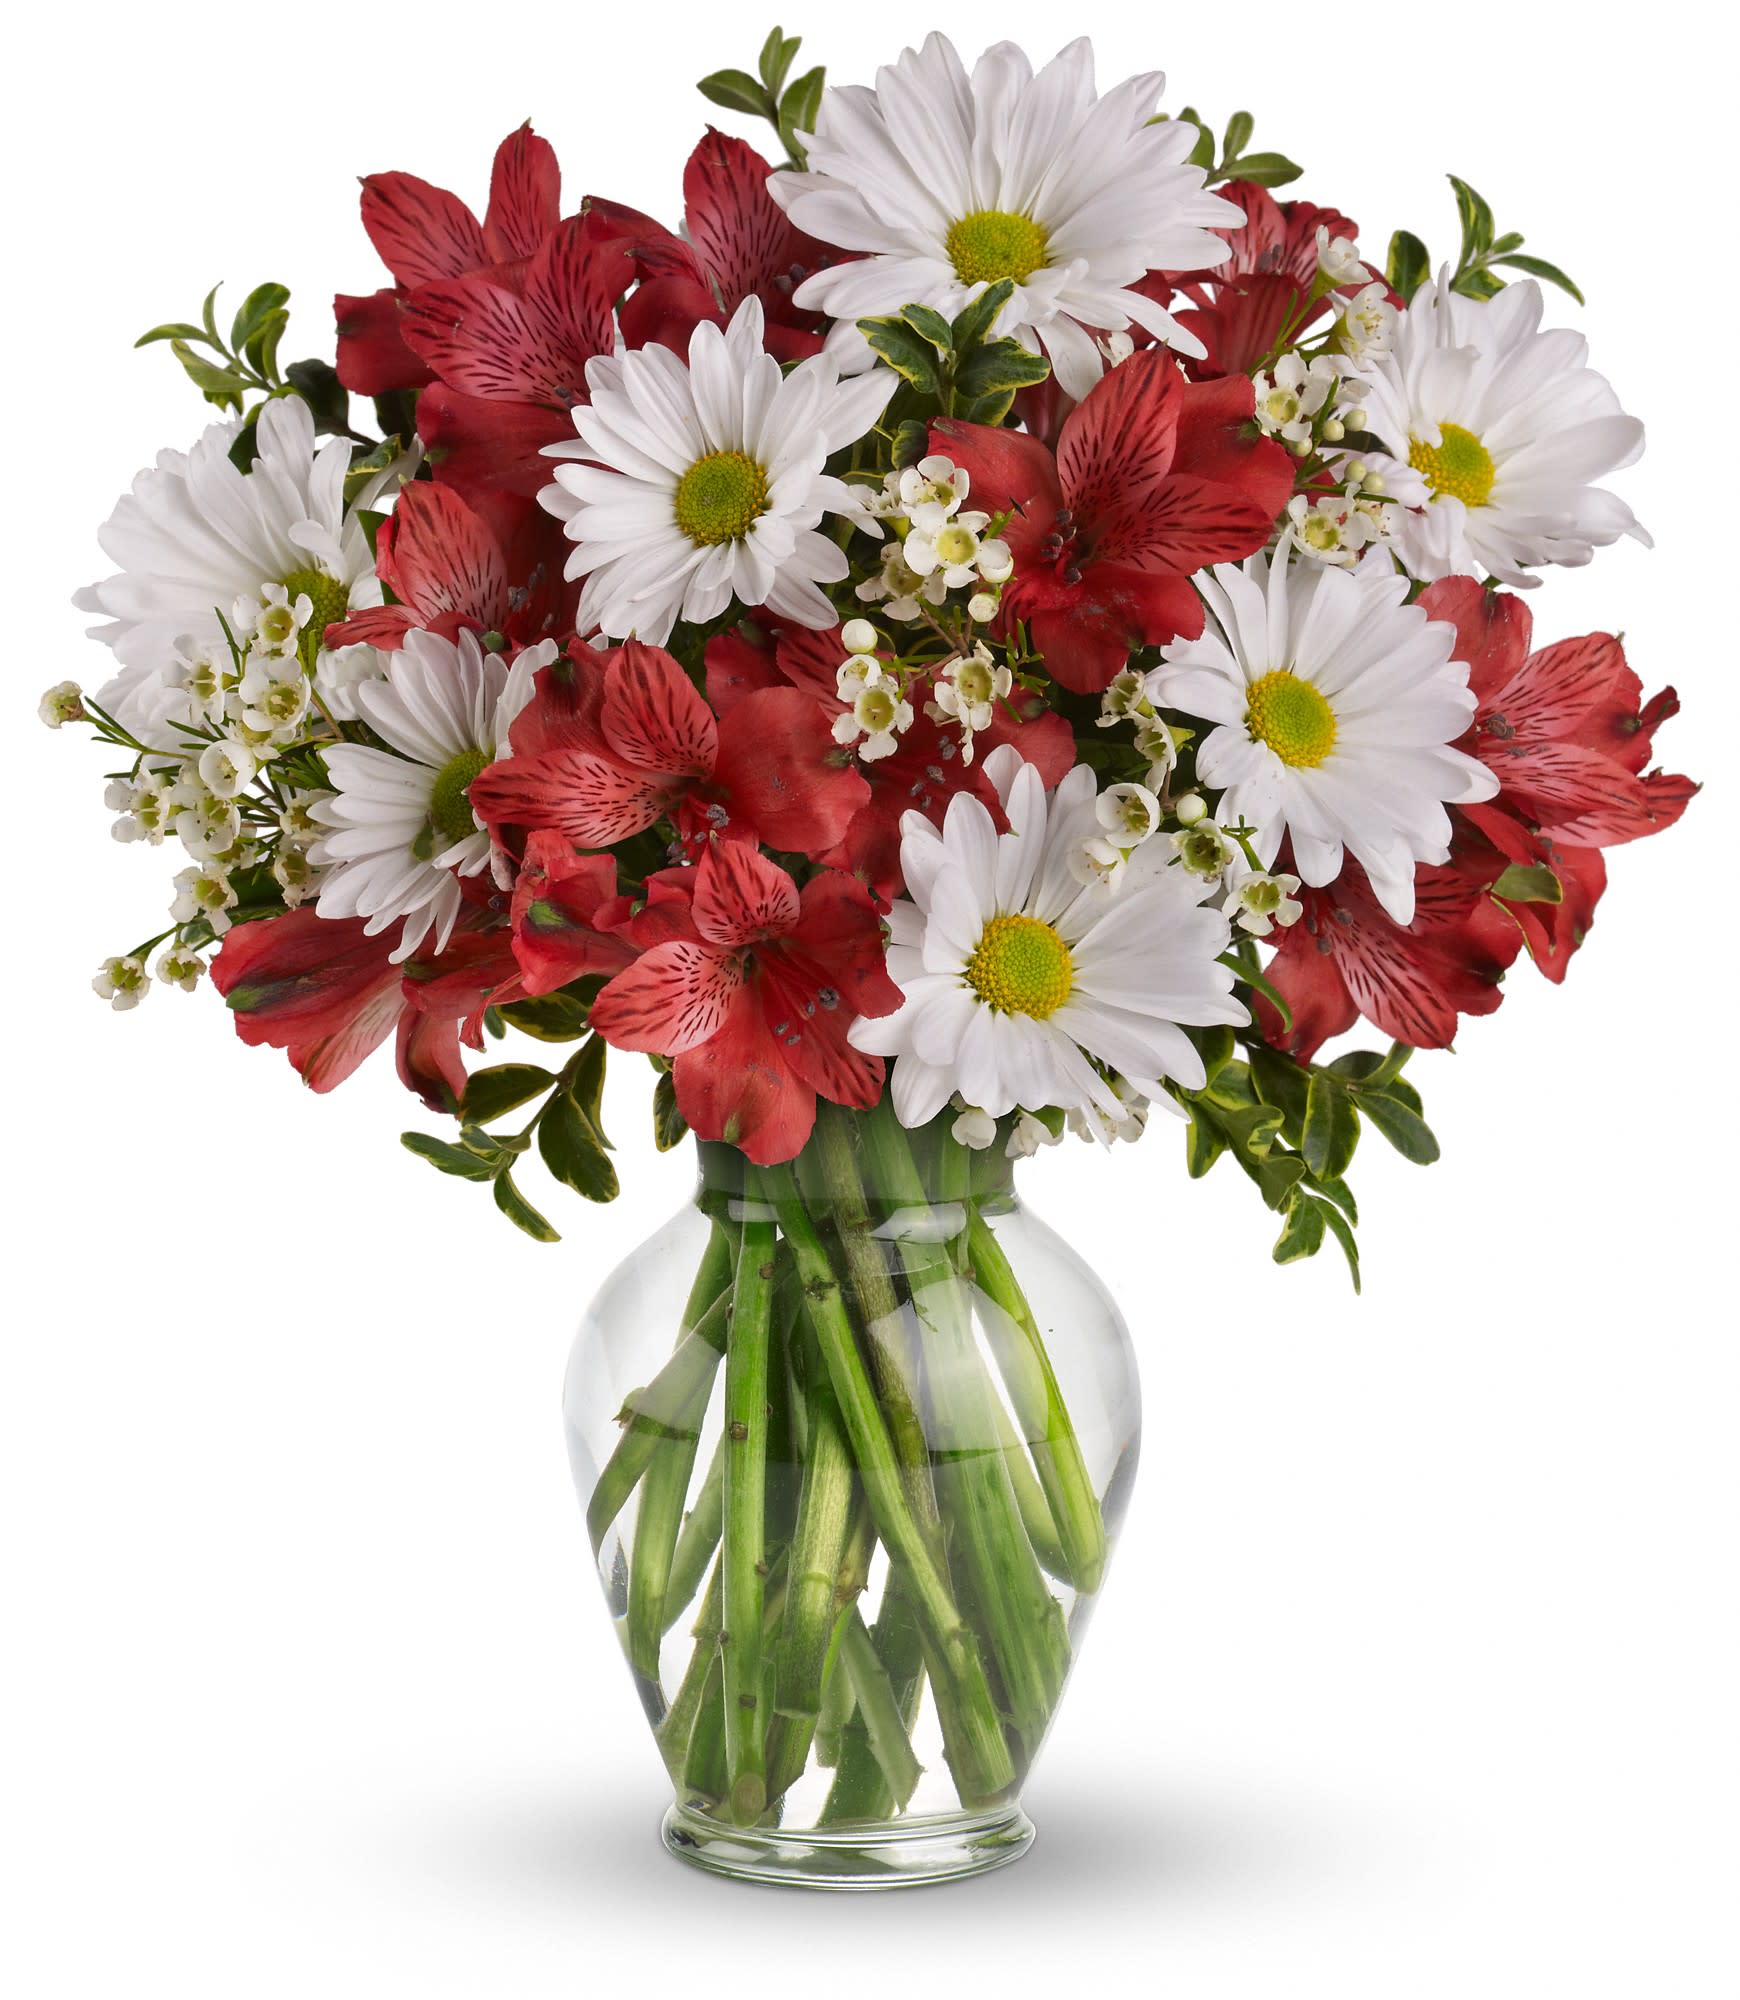 Dancing in Daisies by Teleflora - Daisy days are here again! Reconnect with an old friend by sending this enchanting array of white daisies and red alstroemeria in a sparkling clear glass vase. They'll love it - and you! Expect a phone call.